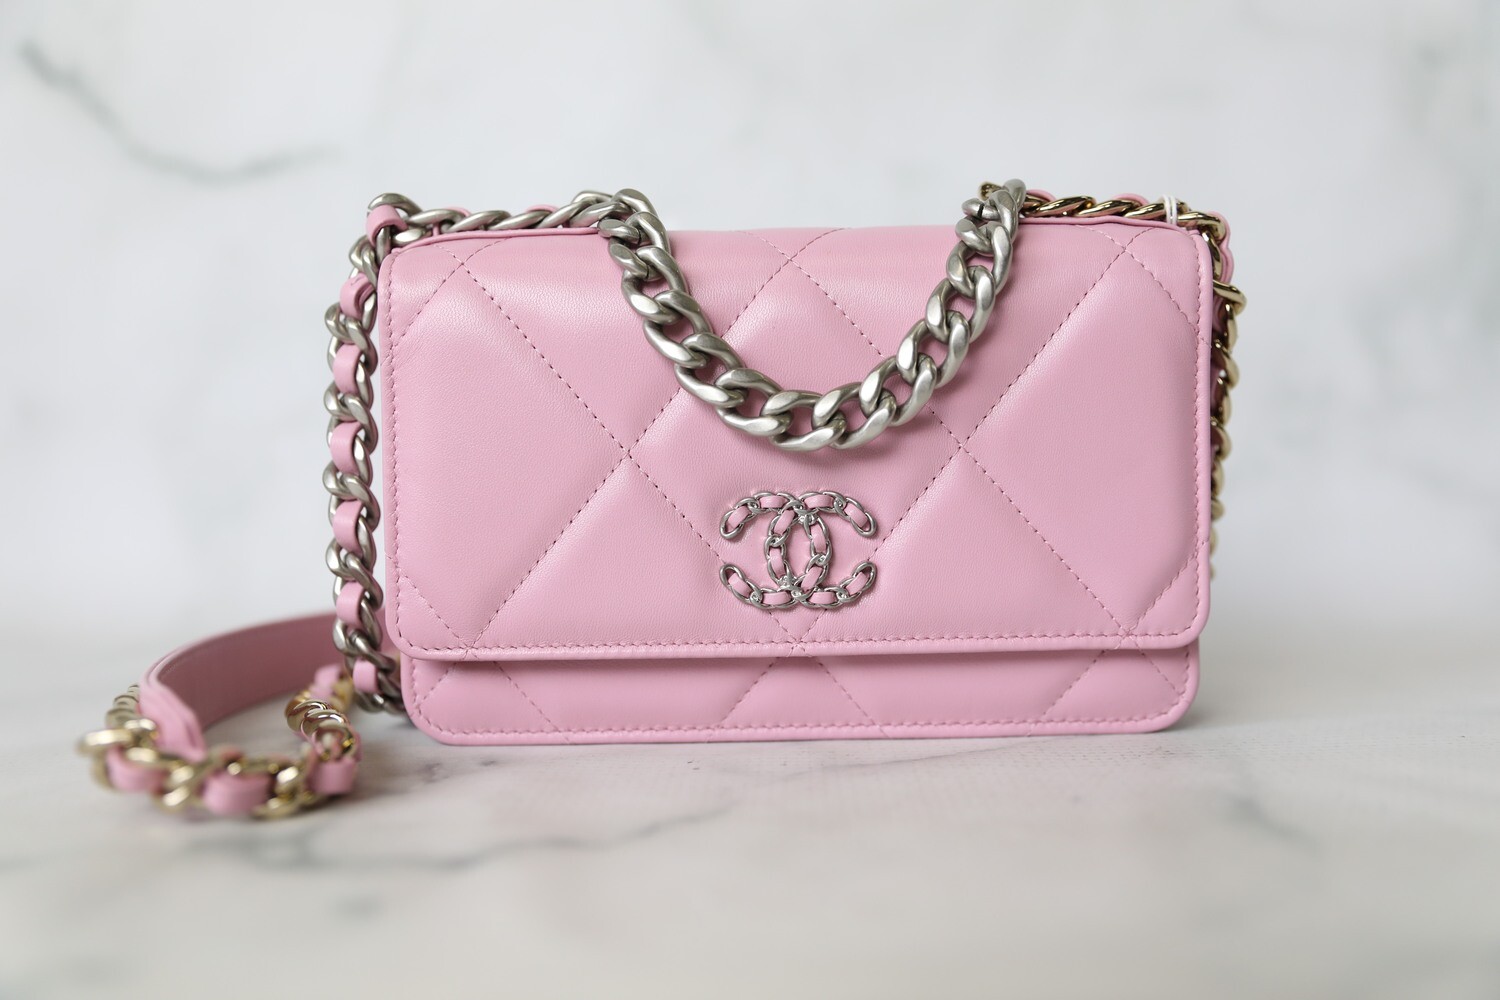 Chanel Pink Quilted Lambskin Leather Classic WOC Clutch Bag  Yoogis Closet